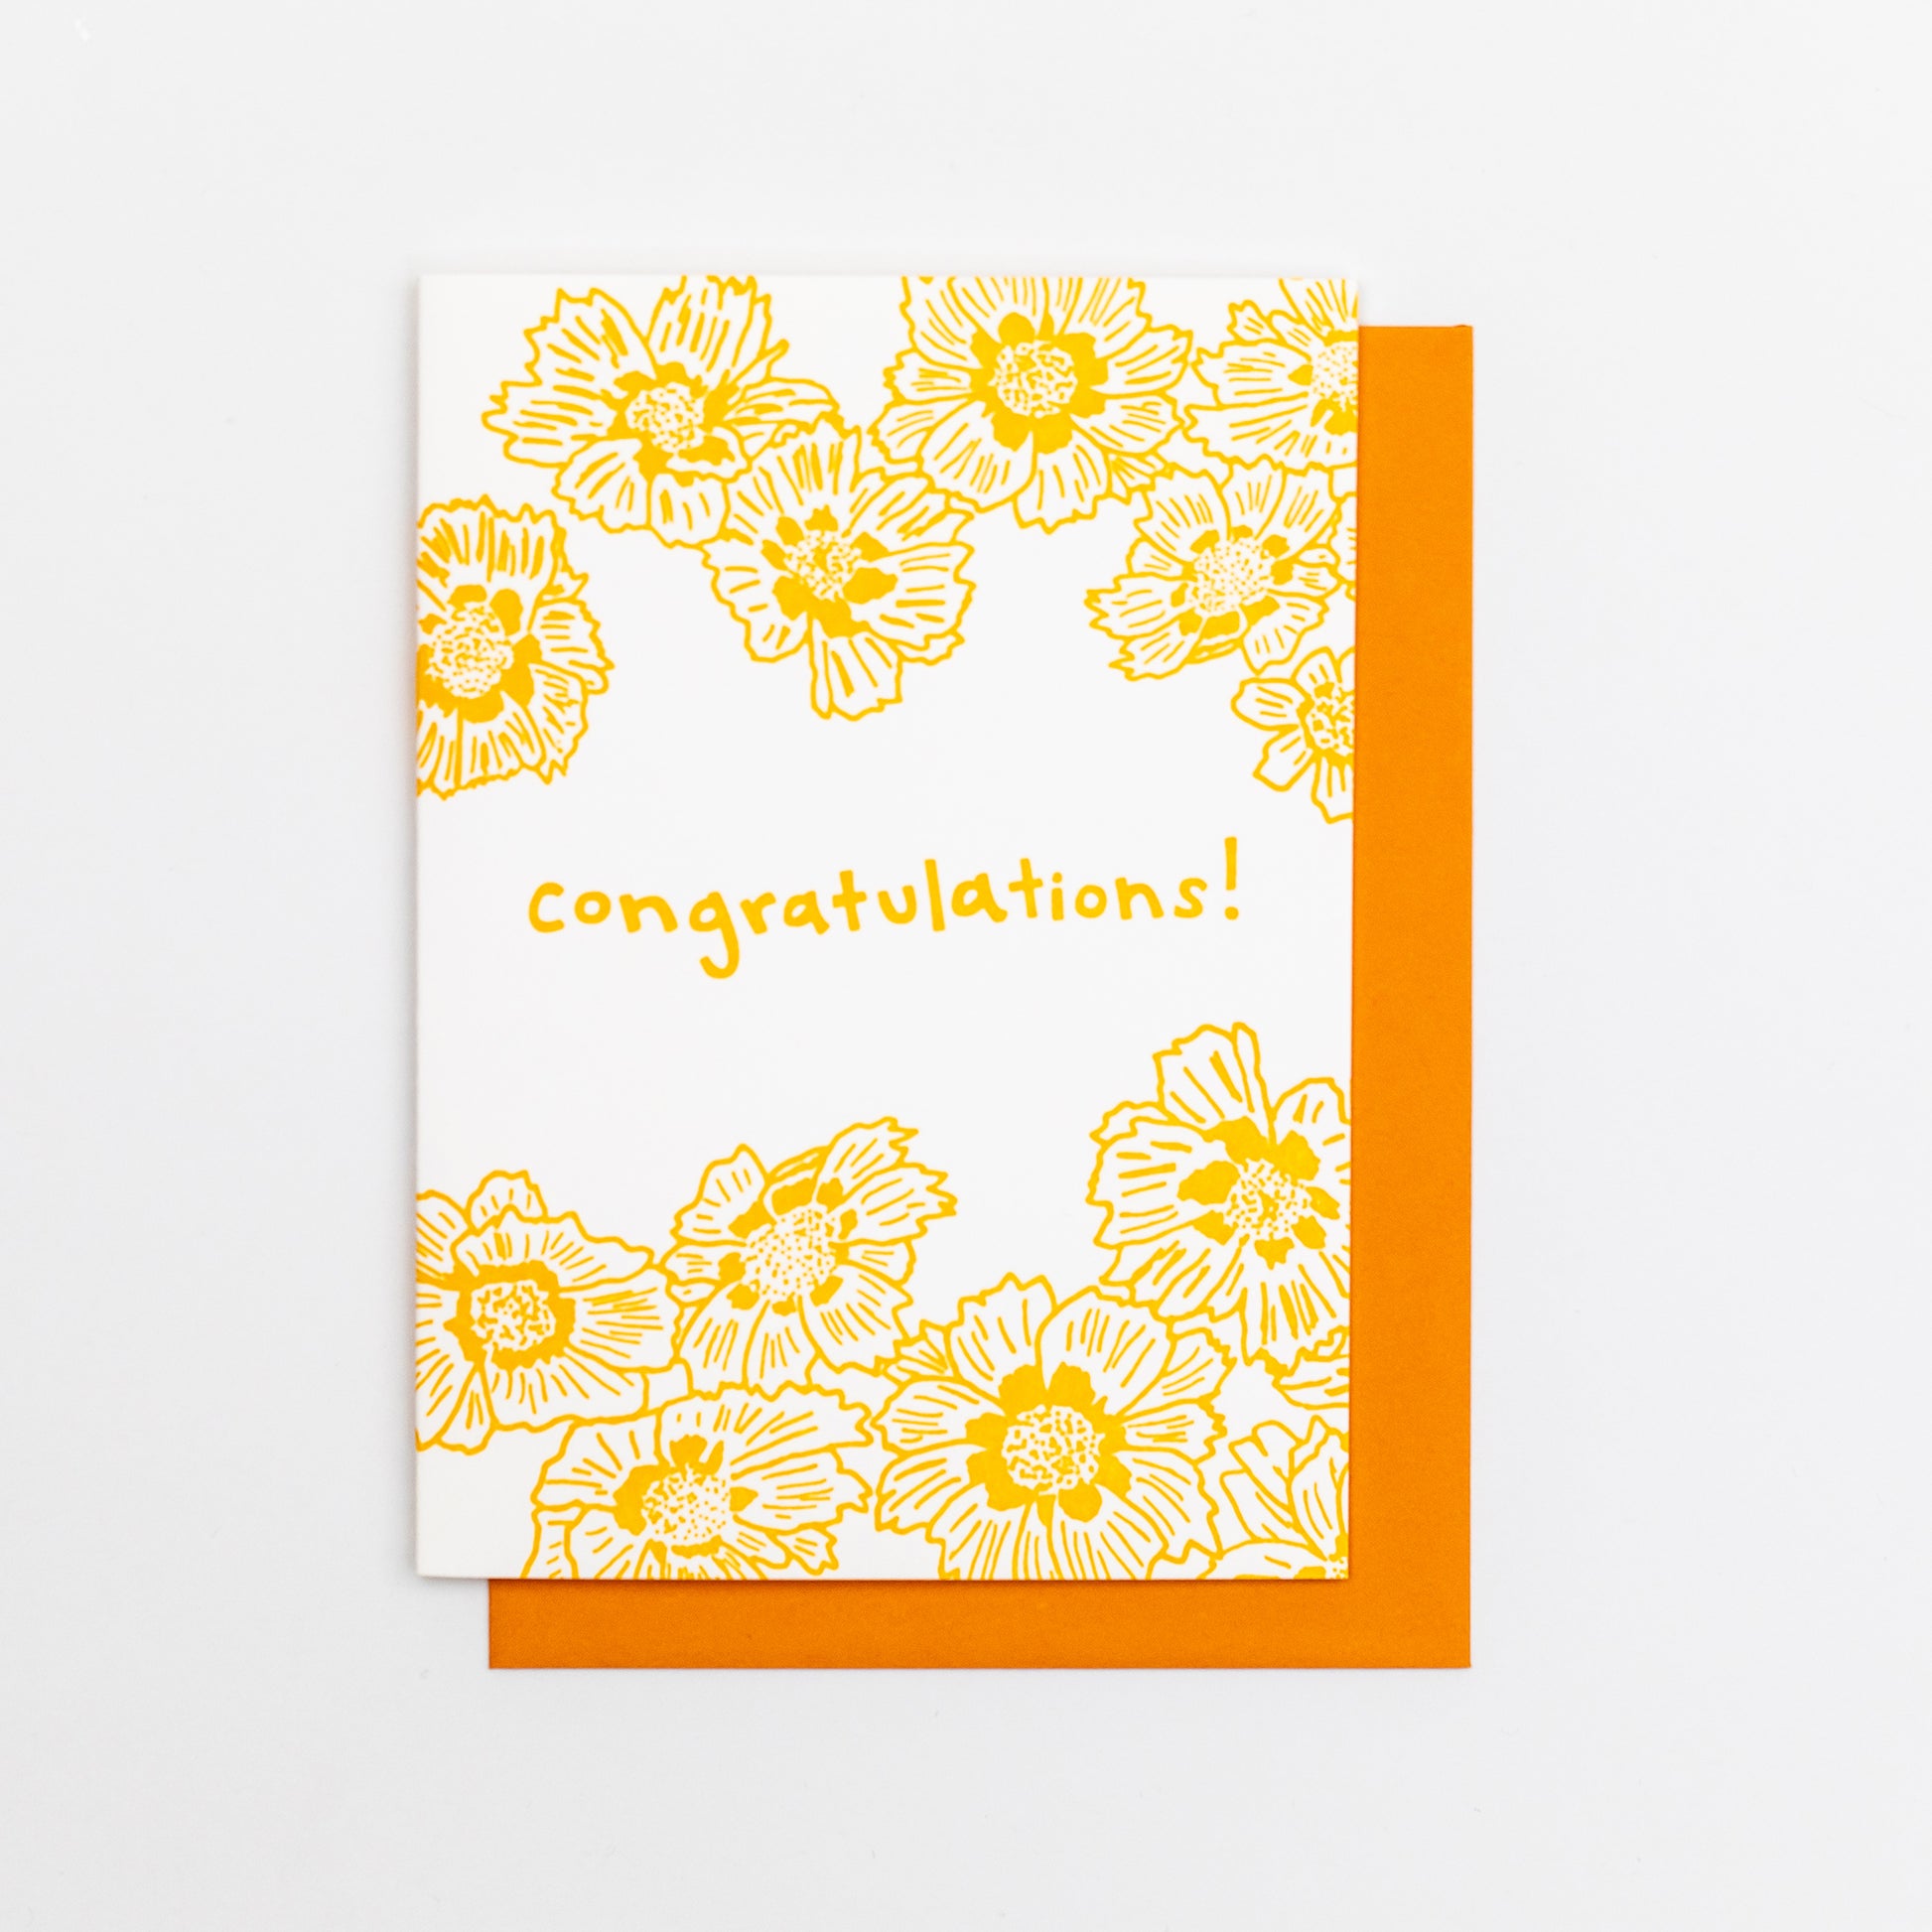 Letterpress greeting card featuring cheerful Coreopsis flowers, printed in a vibrant golden-orange ink. Whimsical hand-drawn text saying "congratulations" is shown in the center of the card, in the same golden-orange ink. The card is white, blank inside, and is paired with a fun orange envelope.